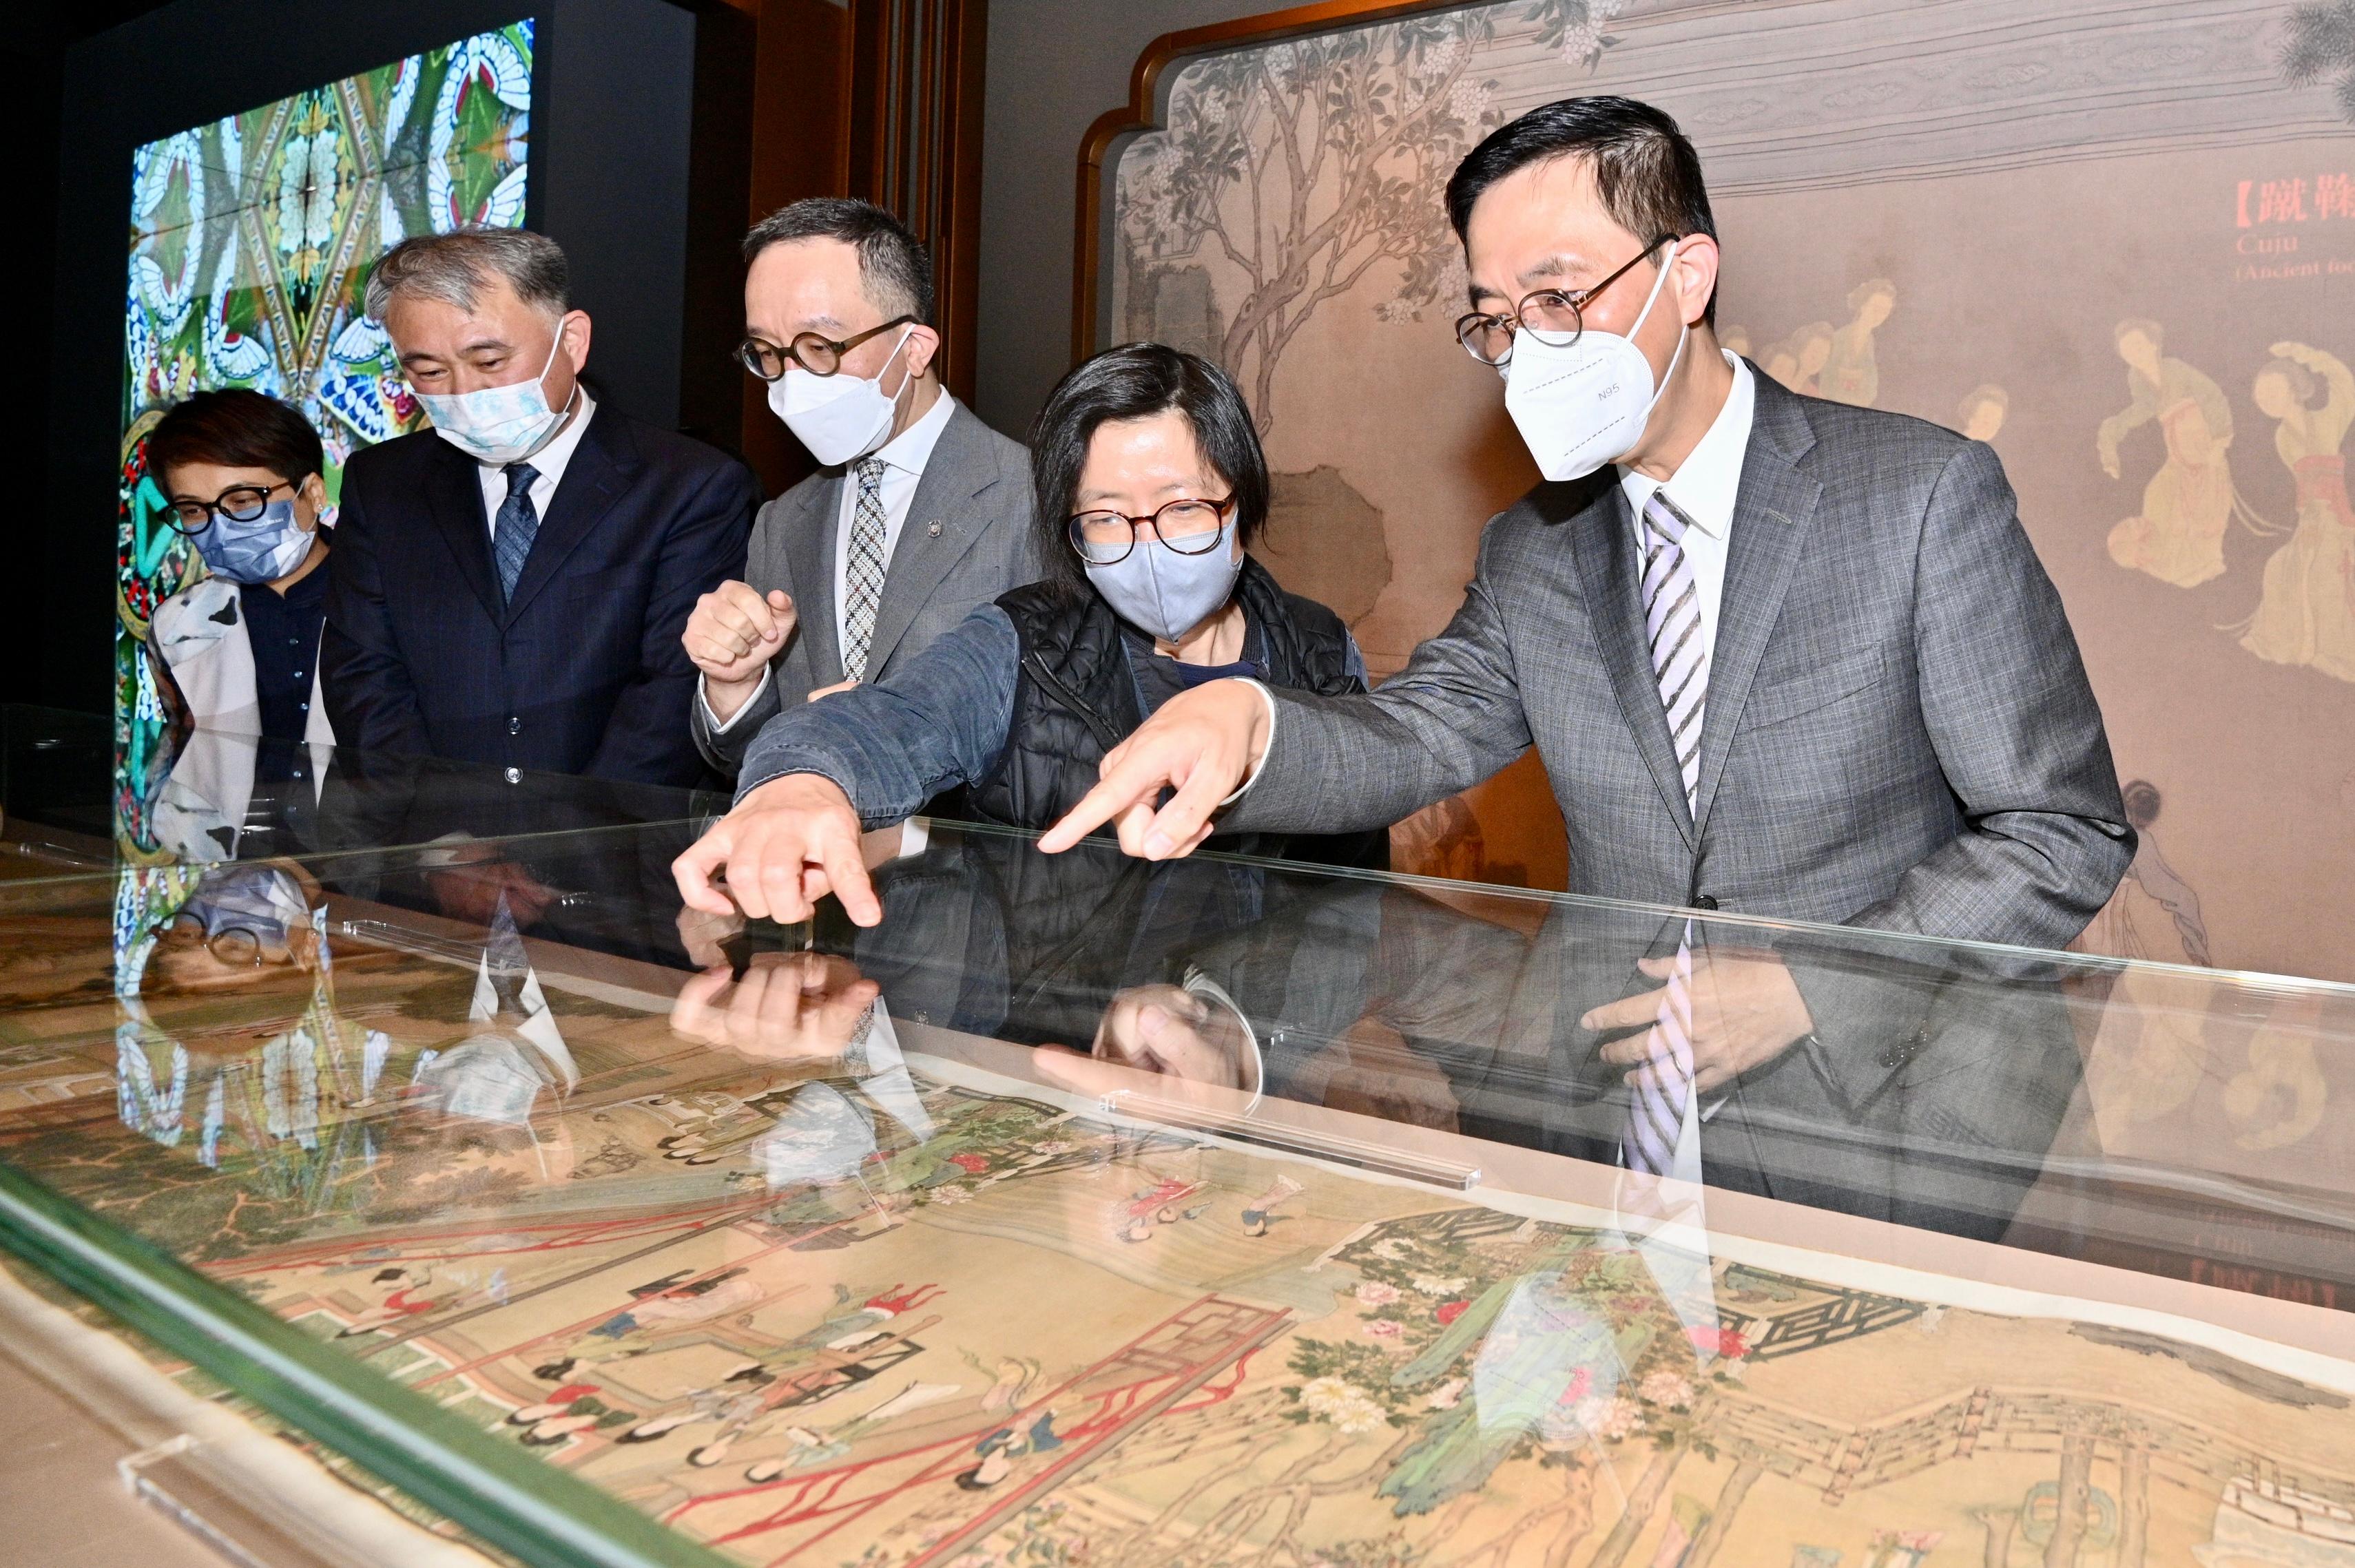 The opening ceremony for the exhibition "The Hong Kong Jockey Club Series: Women and Femininity in Ancient China - Treasures from the Nanjing Museum" was held today (November 29) at the Hong Kong Heritage Museum (HKHM). Photo shows (from right) the Secretary for Culture, Sports and Tourism, Mr Kevin Yeung; the researcher of the Nanjing Museum, Ms Cao Qing; the Executive Director, Charities and Community of the Hong Kong Jockey Club, Dr Gabriel Leung; the Vice Director of the Nanjing Museum, Mr Wang Qizhi and the Deputy Director of Leisure and Cultural Services (Culture), Ms Eve Tam touring the exhibition.